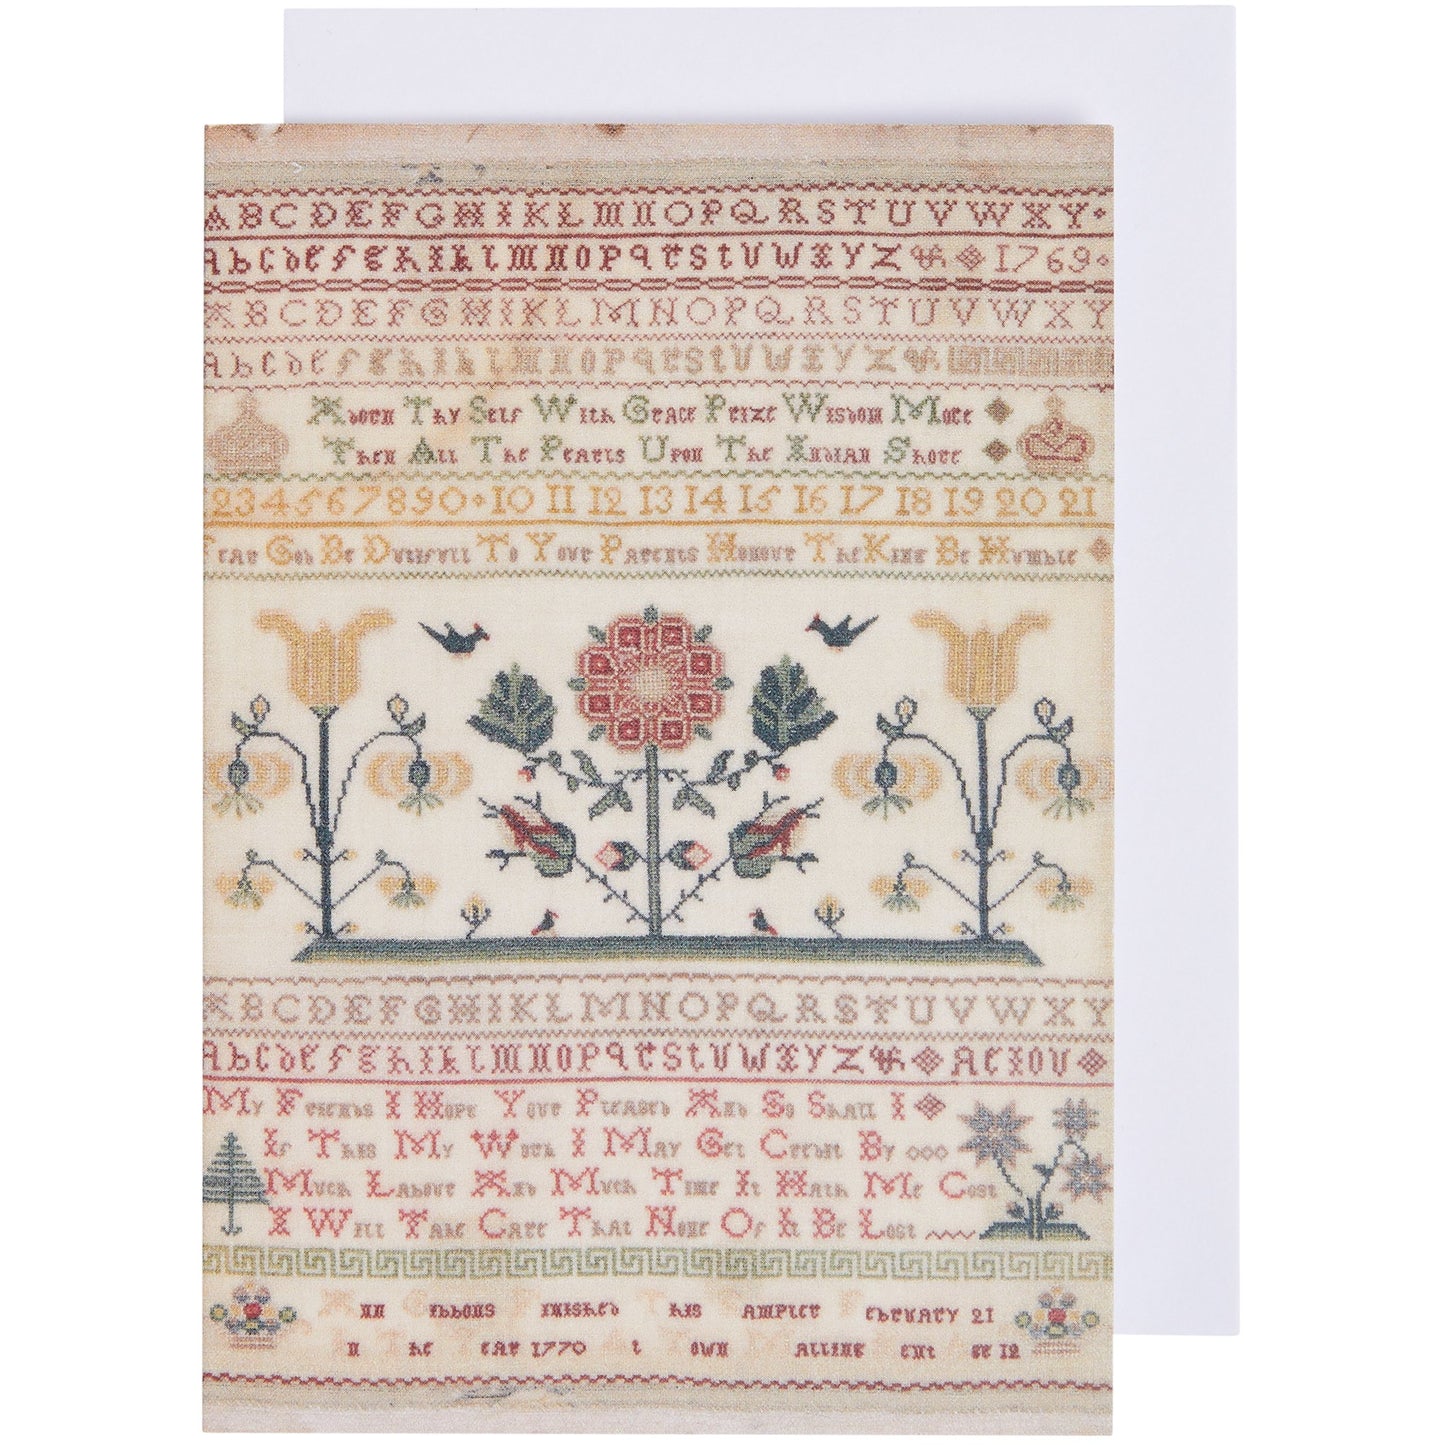 Notelet - band sampler with central floral motif by Ann Gibbons. From the collection of The Fitzwilliam Museum. 